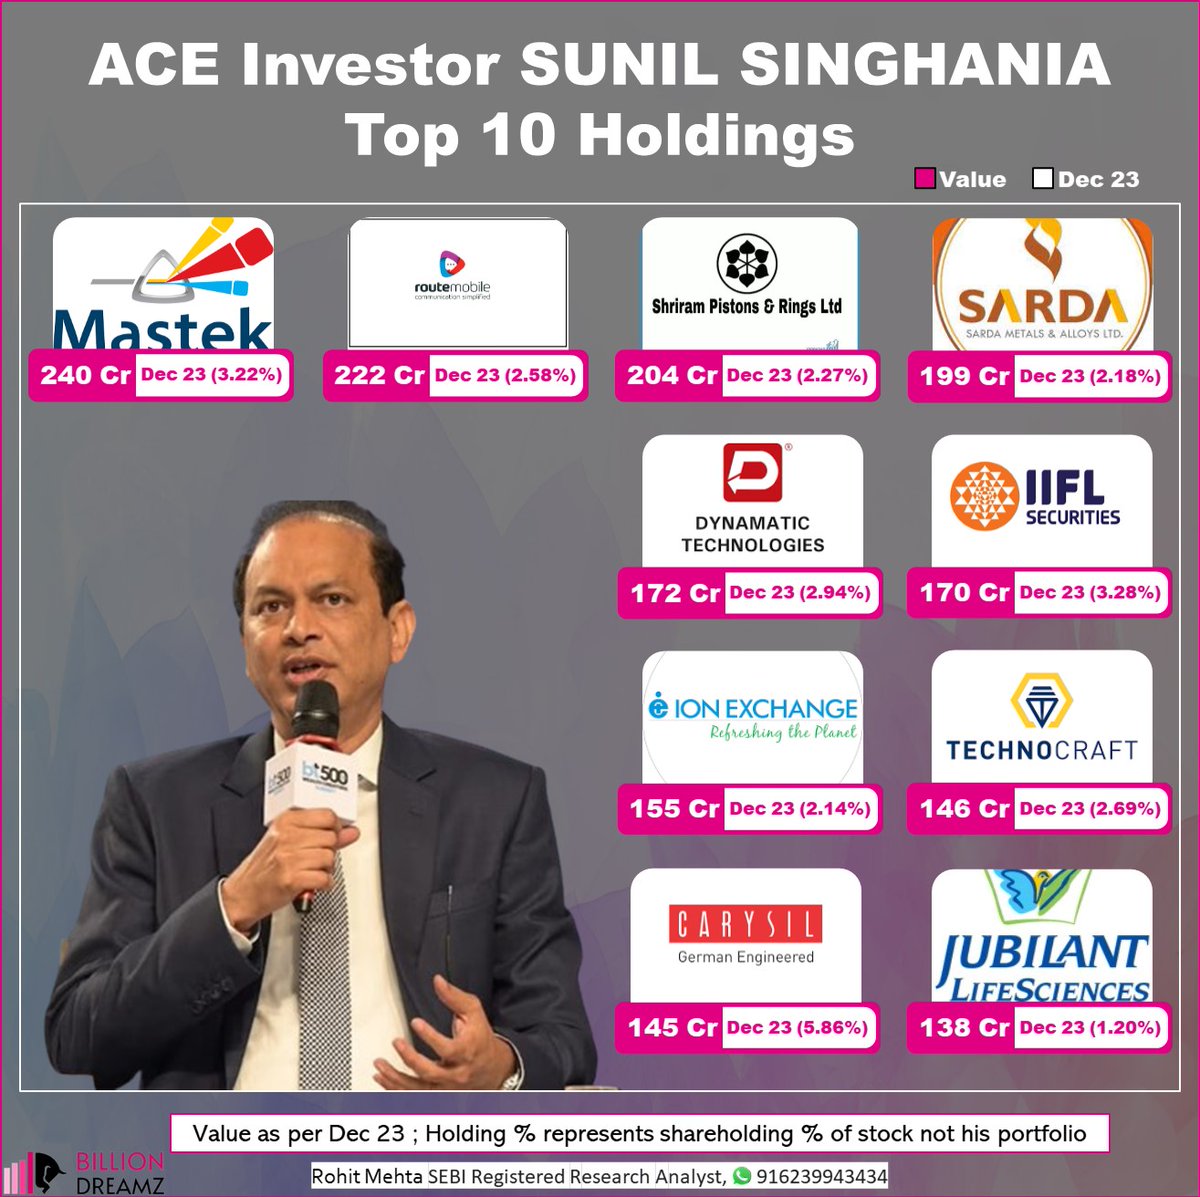 ACE Investor: SUNIL SINGHANIA🌟         

10 Top Holdings in the Portfolio of Mr. SUNIL SINGHANIA📈

Note: 'The securities quoted are for illustration only and are not recommendatory'

#Mastek #Routemobile #ShriramPistons #Sarda #DynamaticTech #IIFL #IonExchange #TechnoCraft